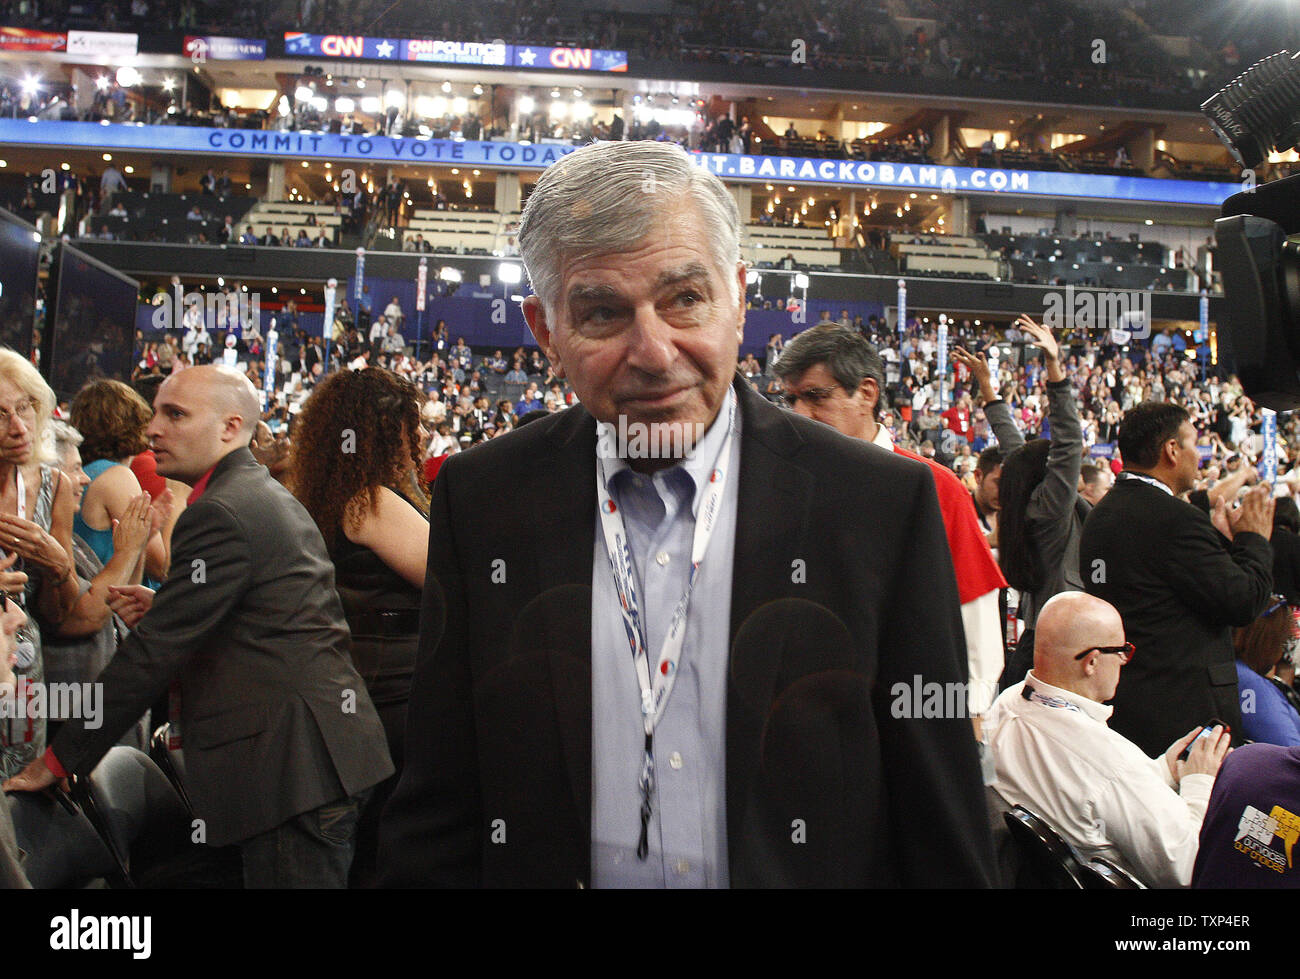 1988 Democratic Presidential candidate and former Massachusetts Governer Michael Dukakis visits the floor at the Time Warner Cable Arena during the Democratic National Convention in Charlotte, North Carolina on September 5, 2012.          UPI/Nell Redmond Stock Photo